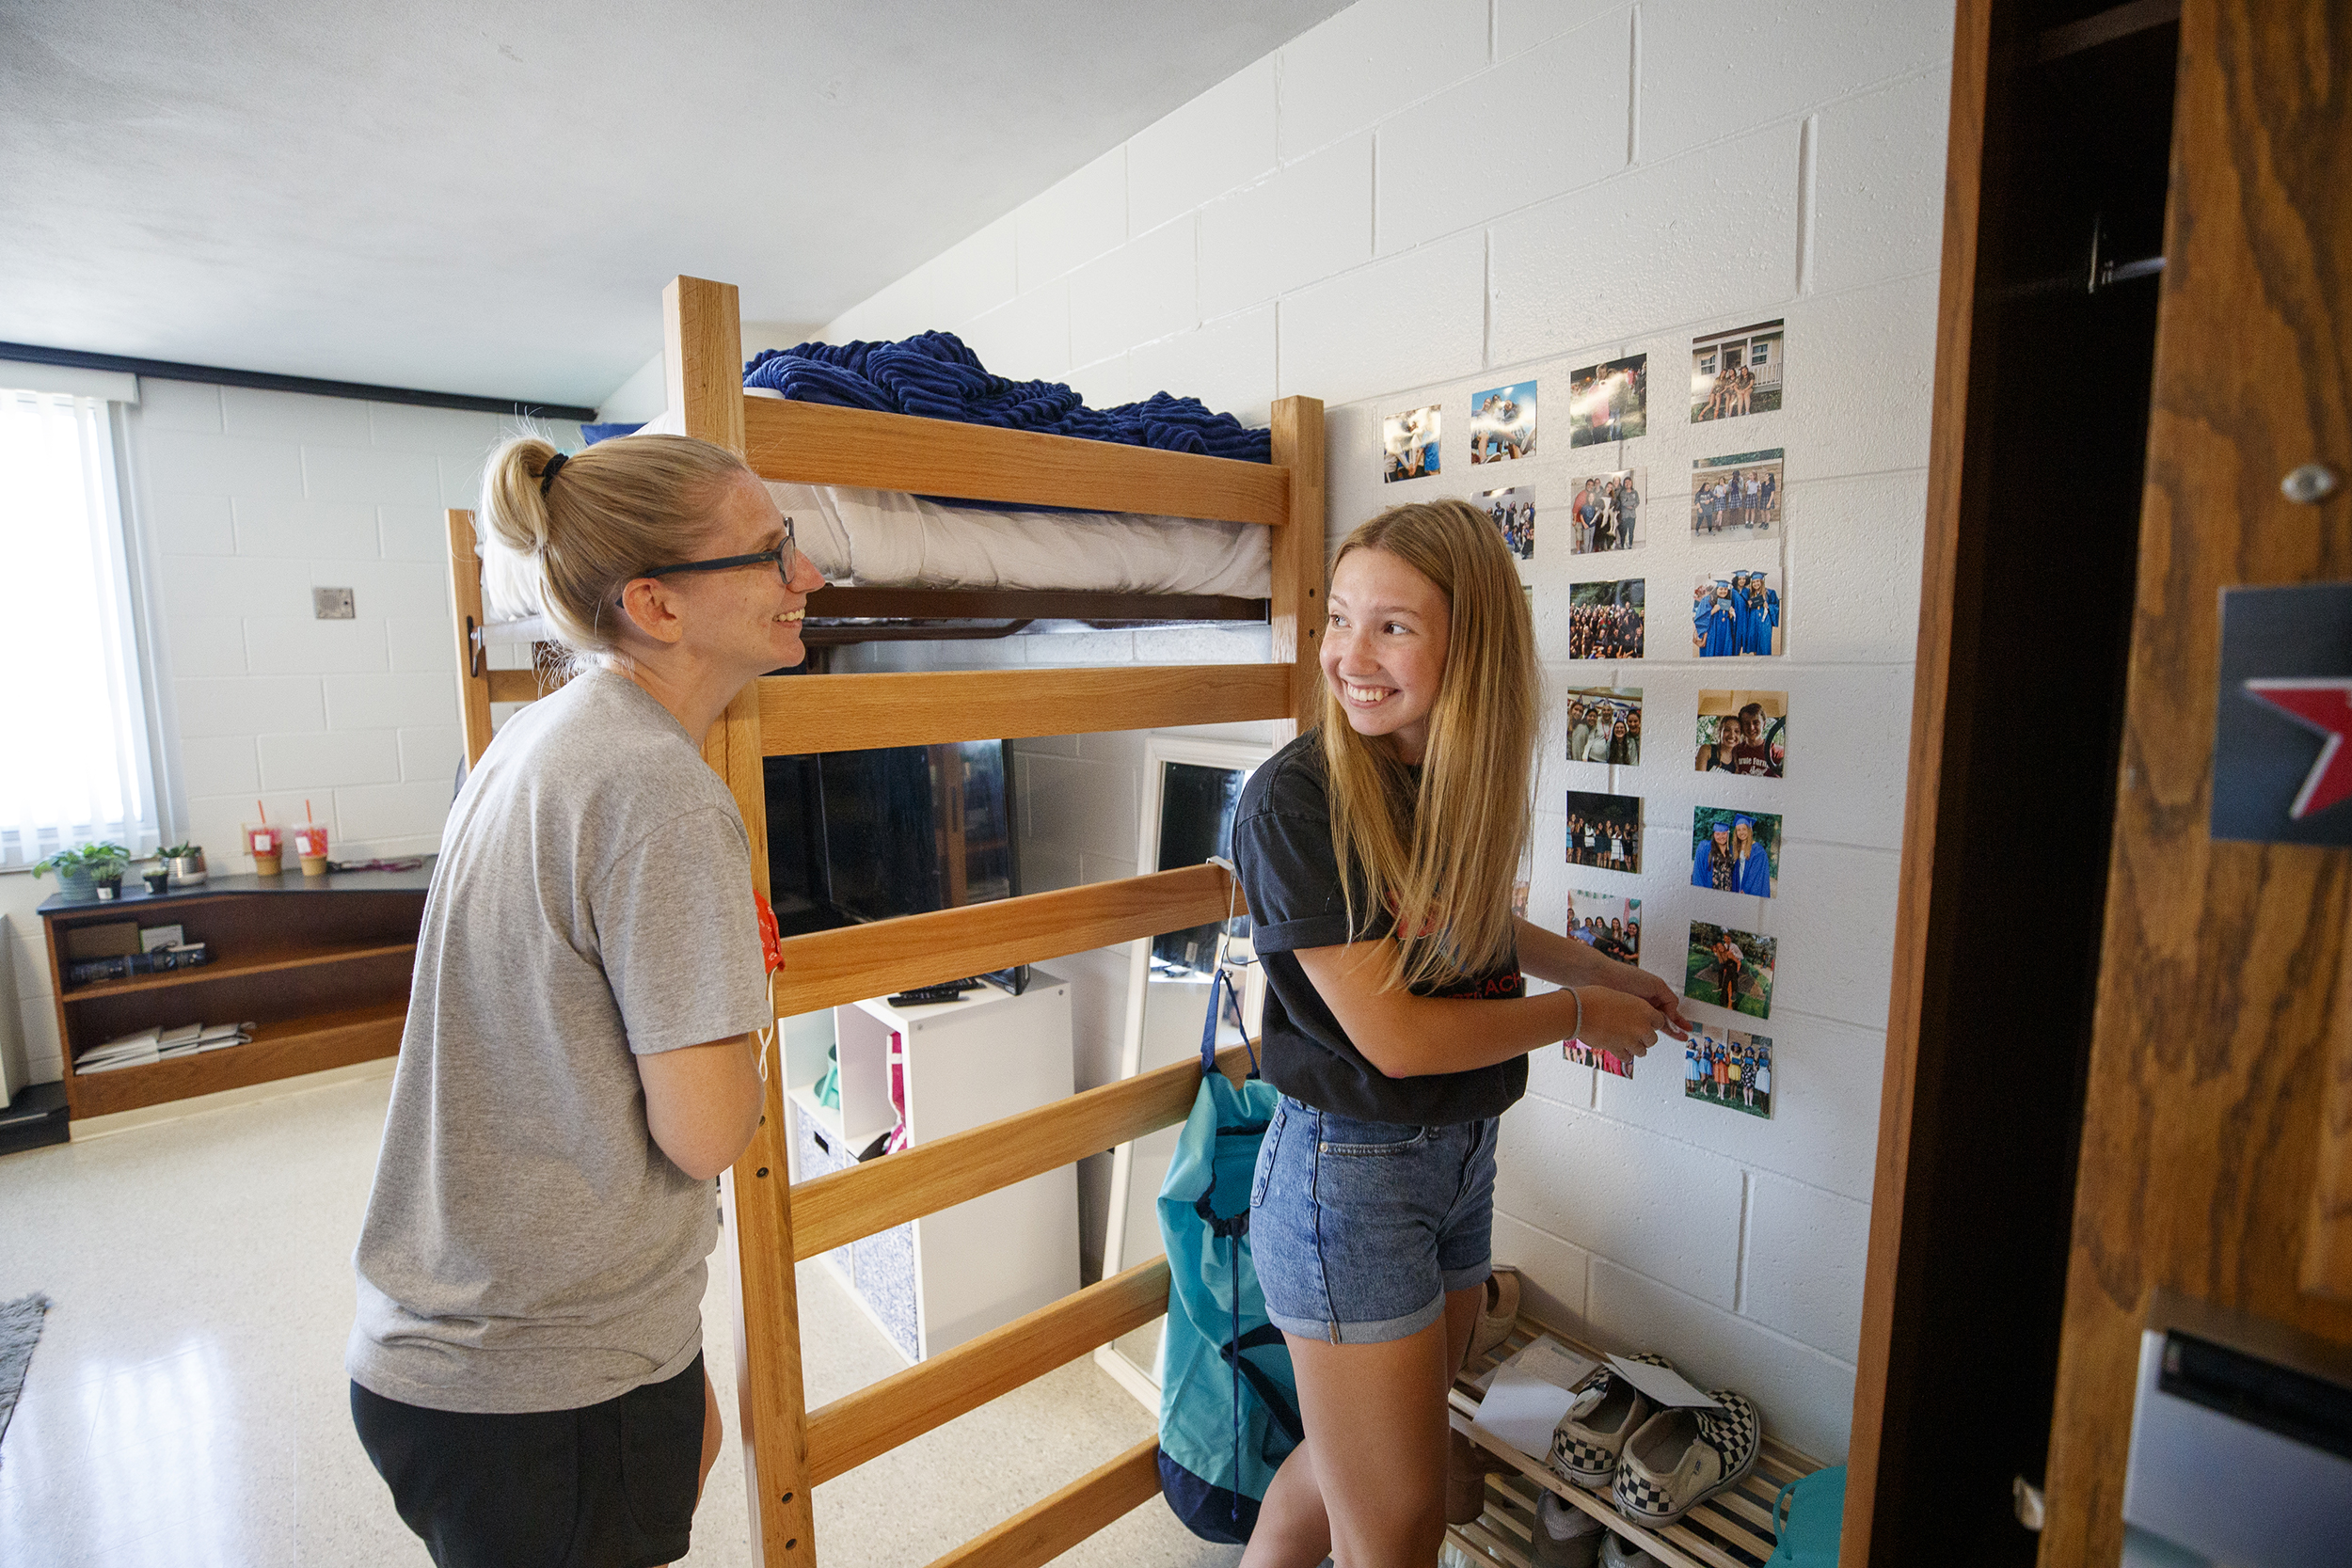 Miqaela Davis (right), from Omaha, smiles at her mom, Monica, after finishing decorating one of her walls in August 2020. The majority of Husker students using the residence halls will move in Aug. 15-19, with curbside service again provided.